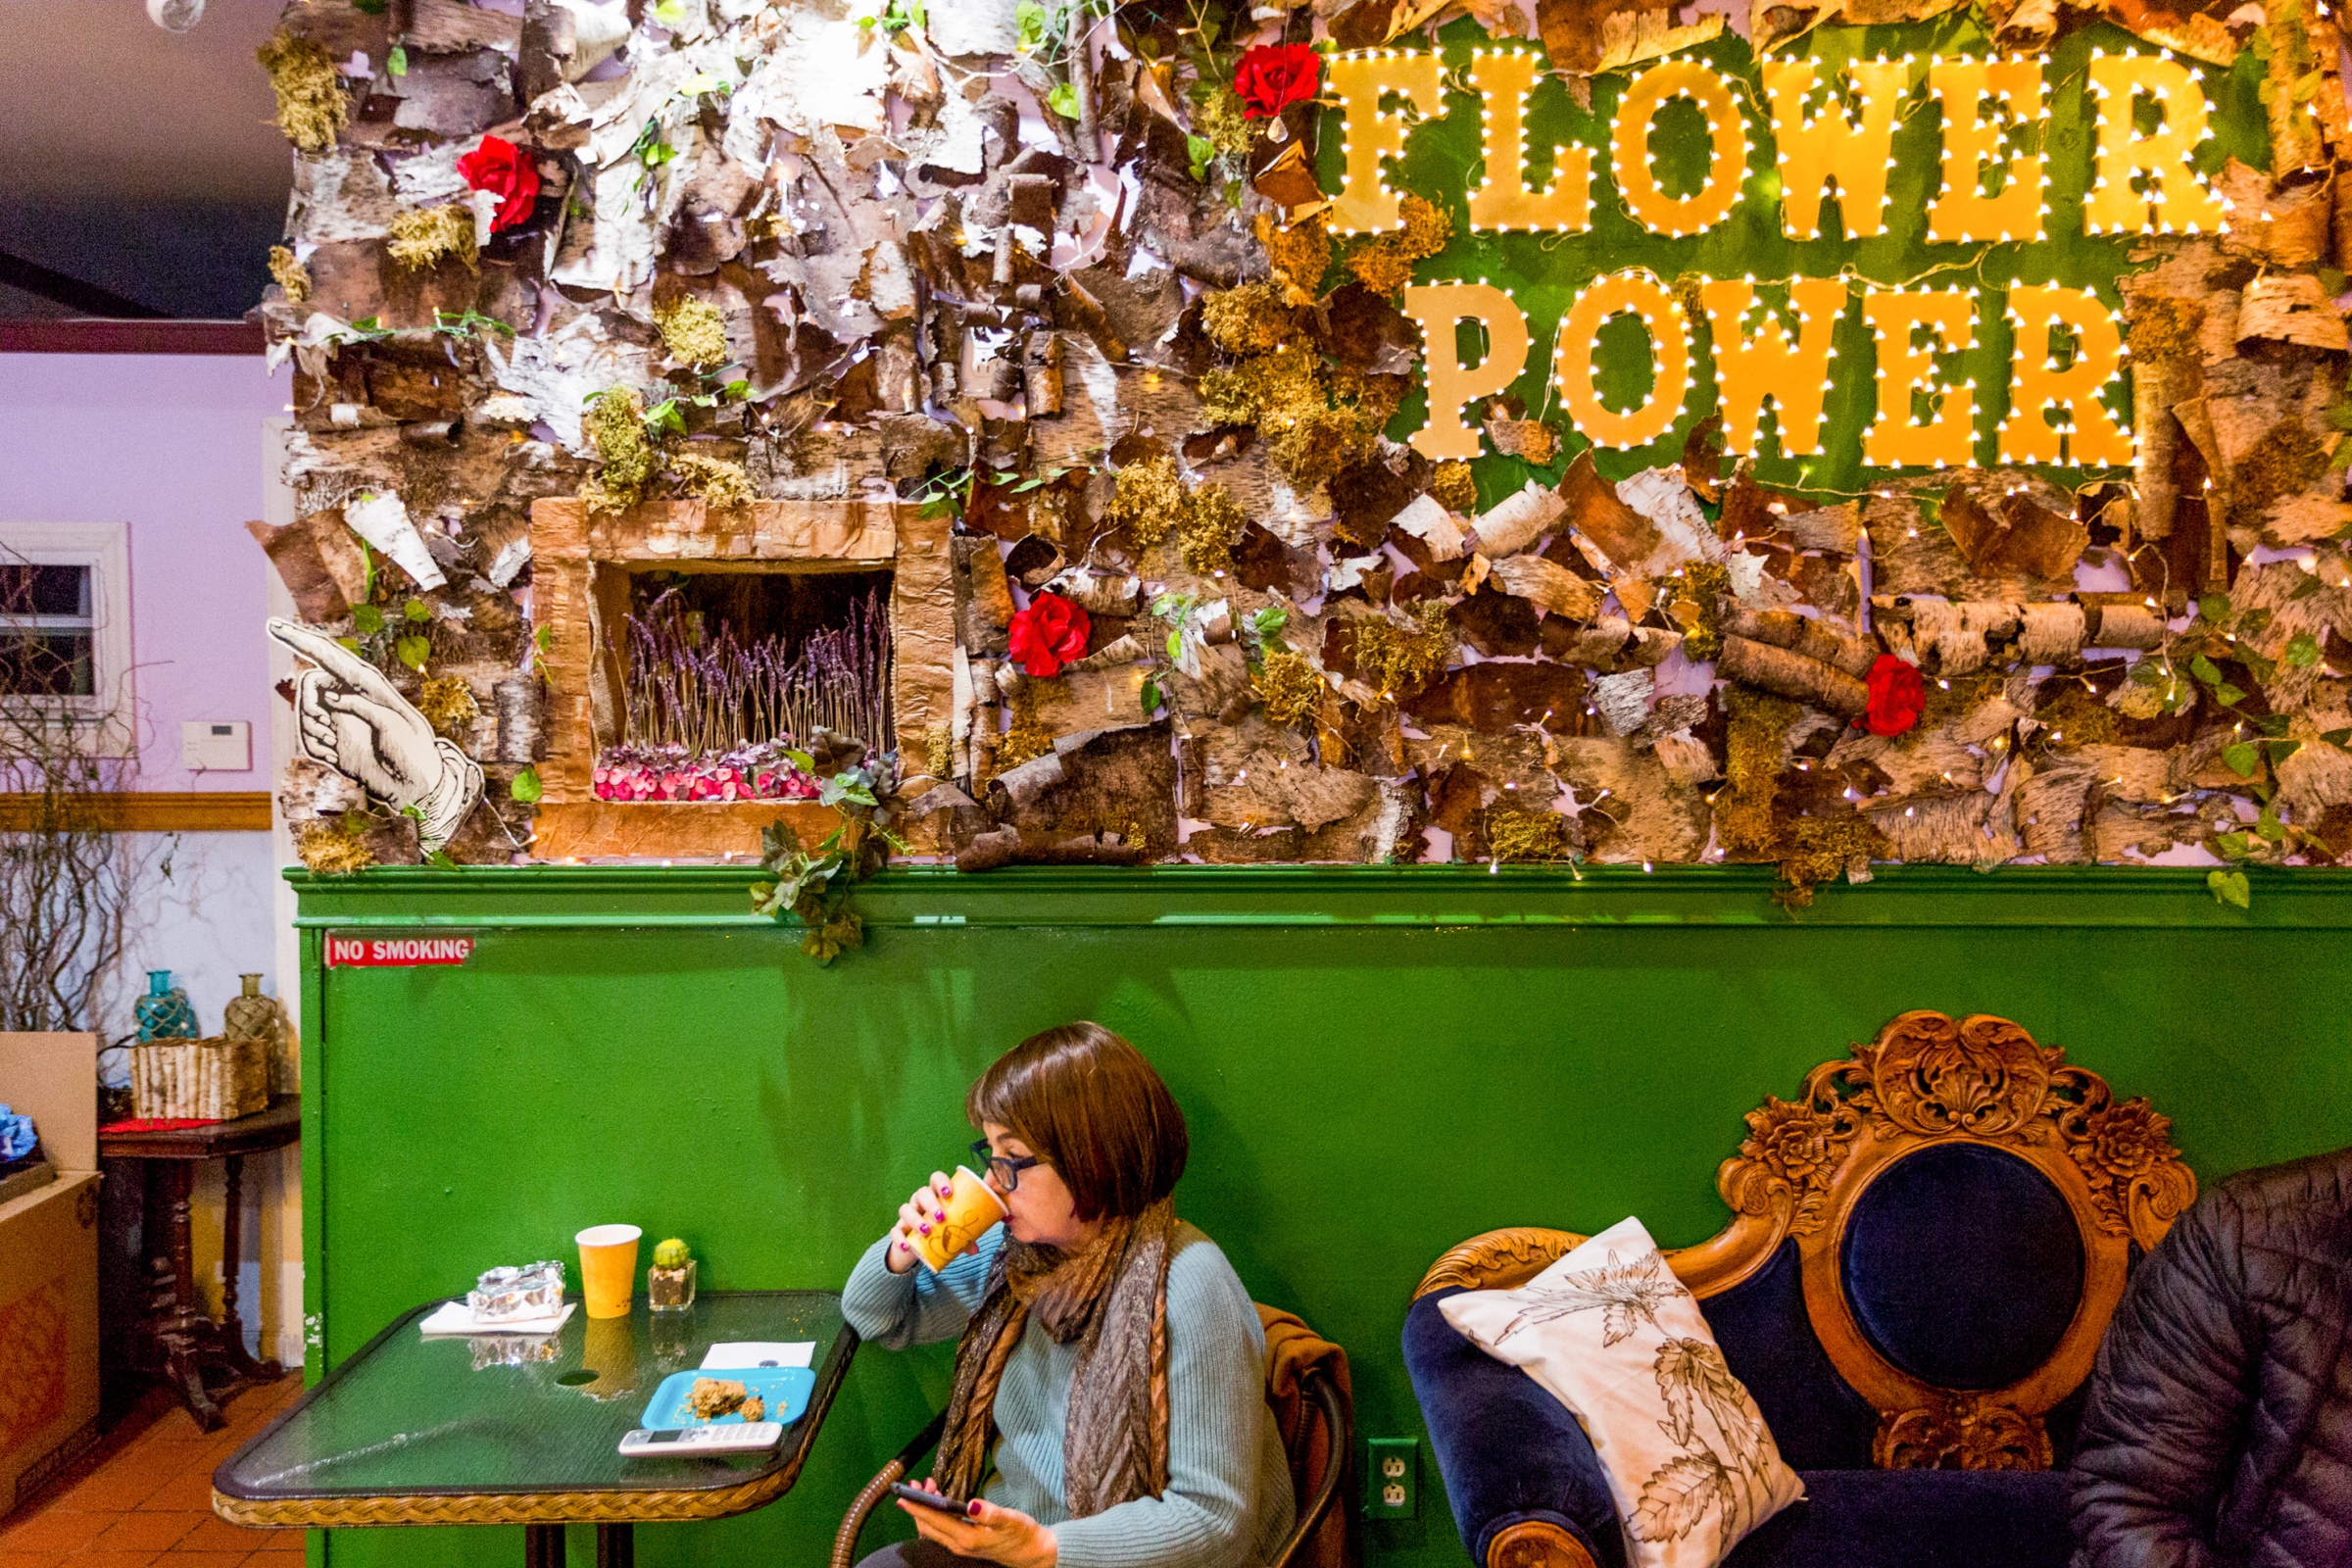 Gail Grabowski drinks a coffee at the Flower Power Coffee...